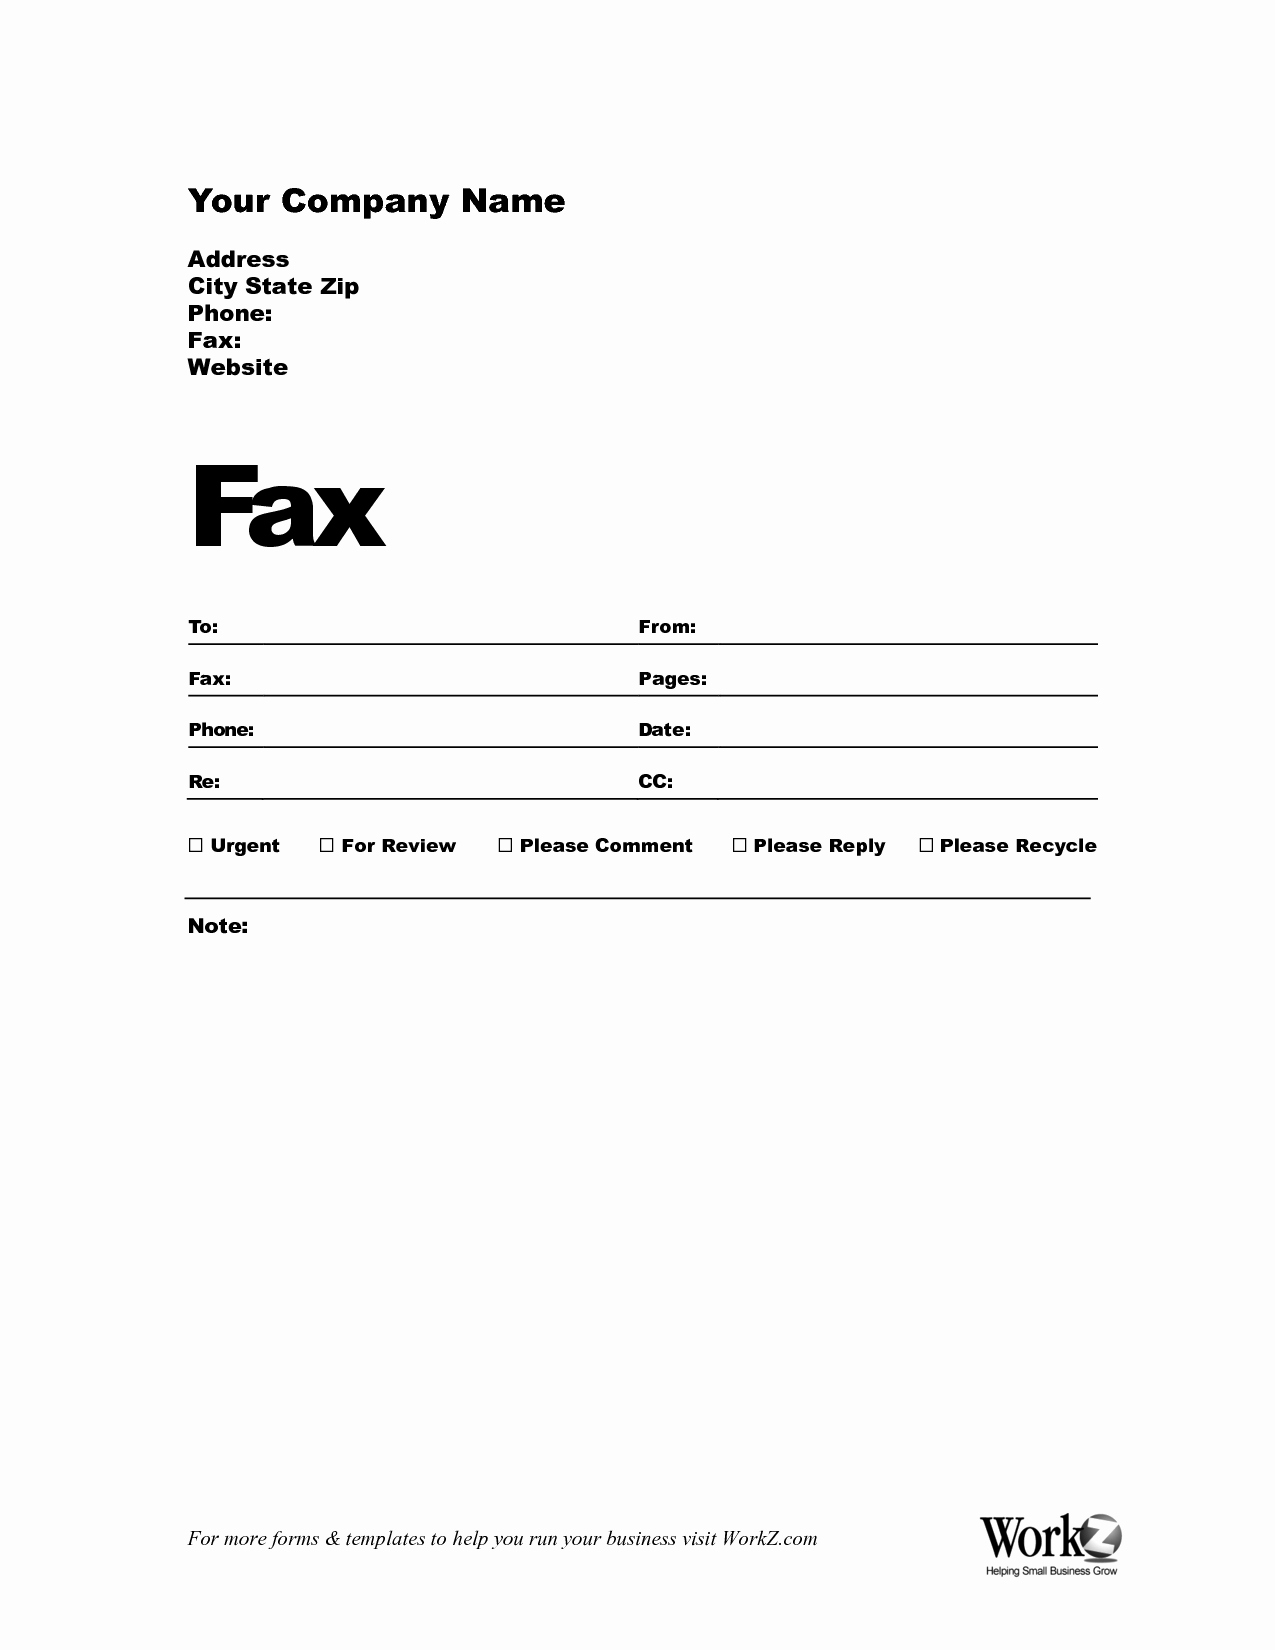 Fax Cover Sheet Template Best Of Free Fax Cover Sheet Template - Free Printable Fax Cover Sheet